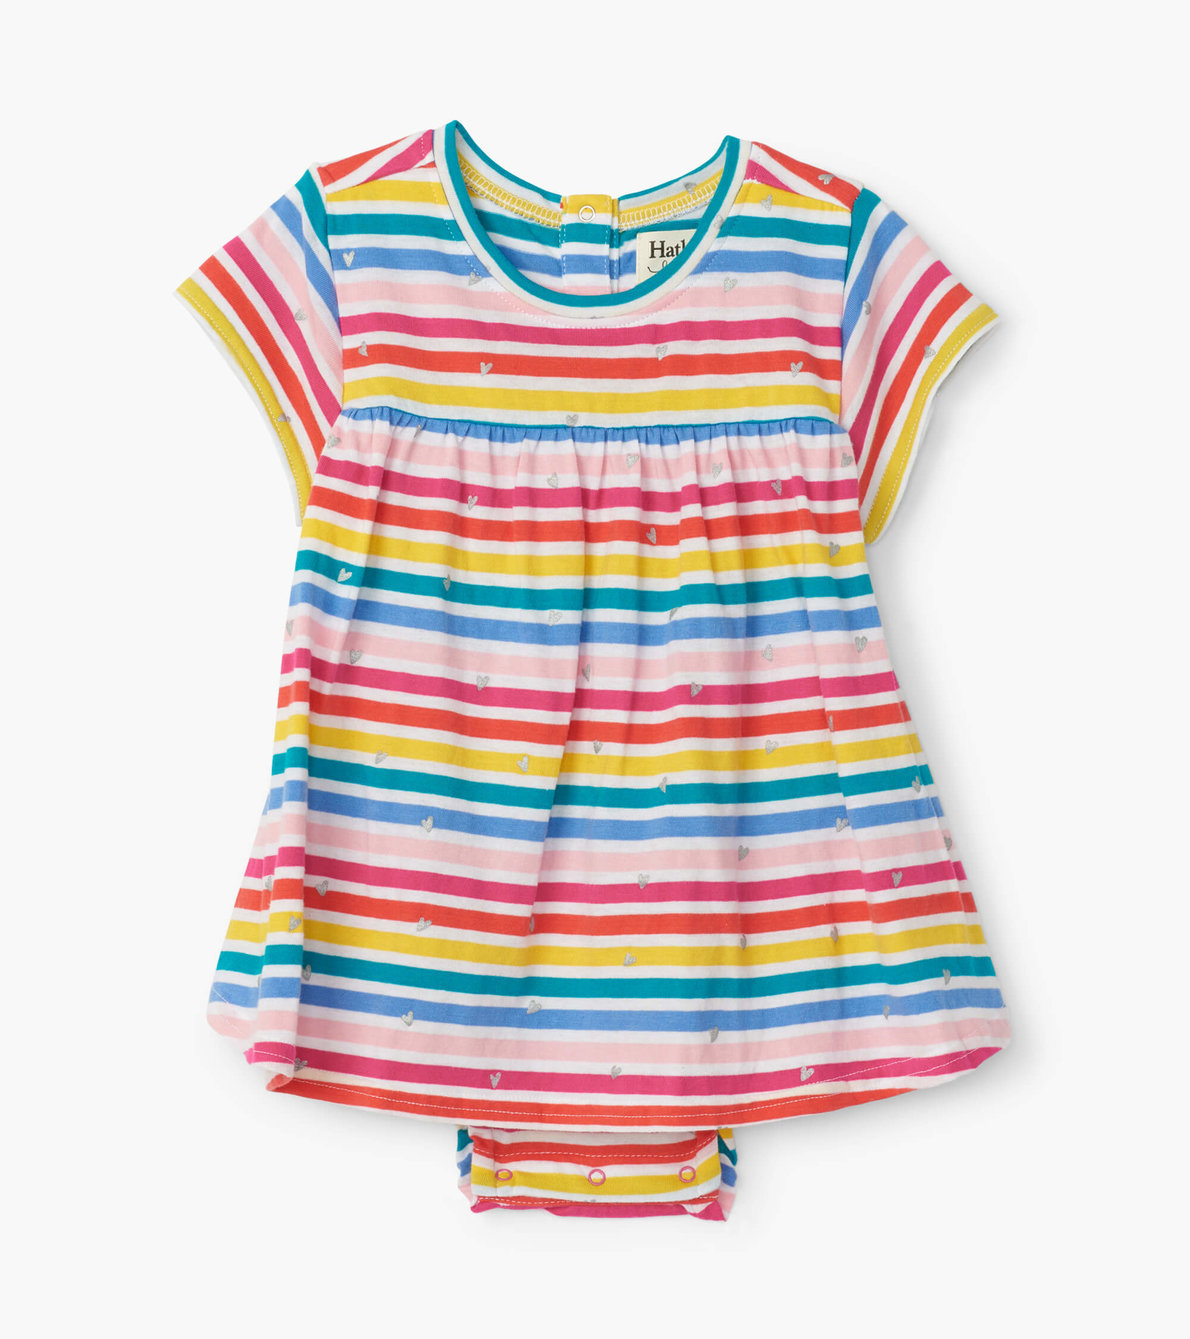 View larger image of Rainbow Stripe Baby One-Piece Dress